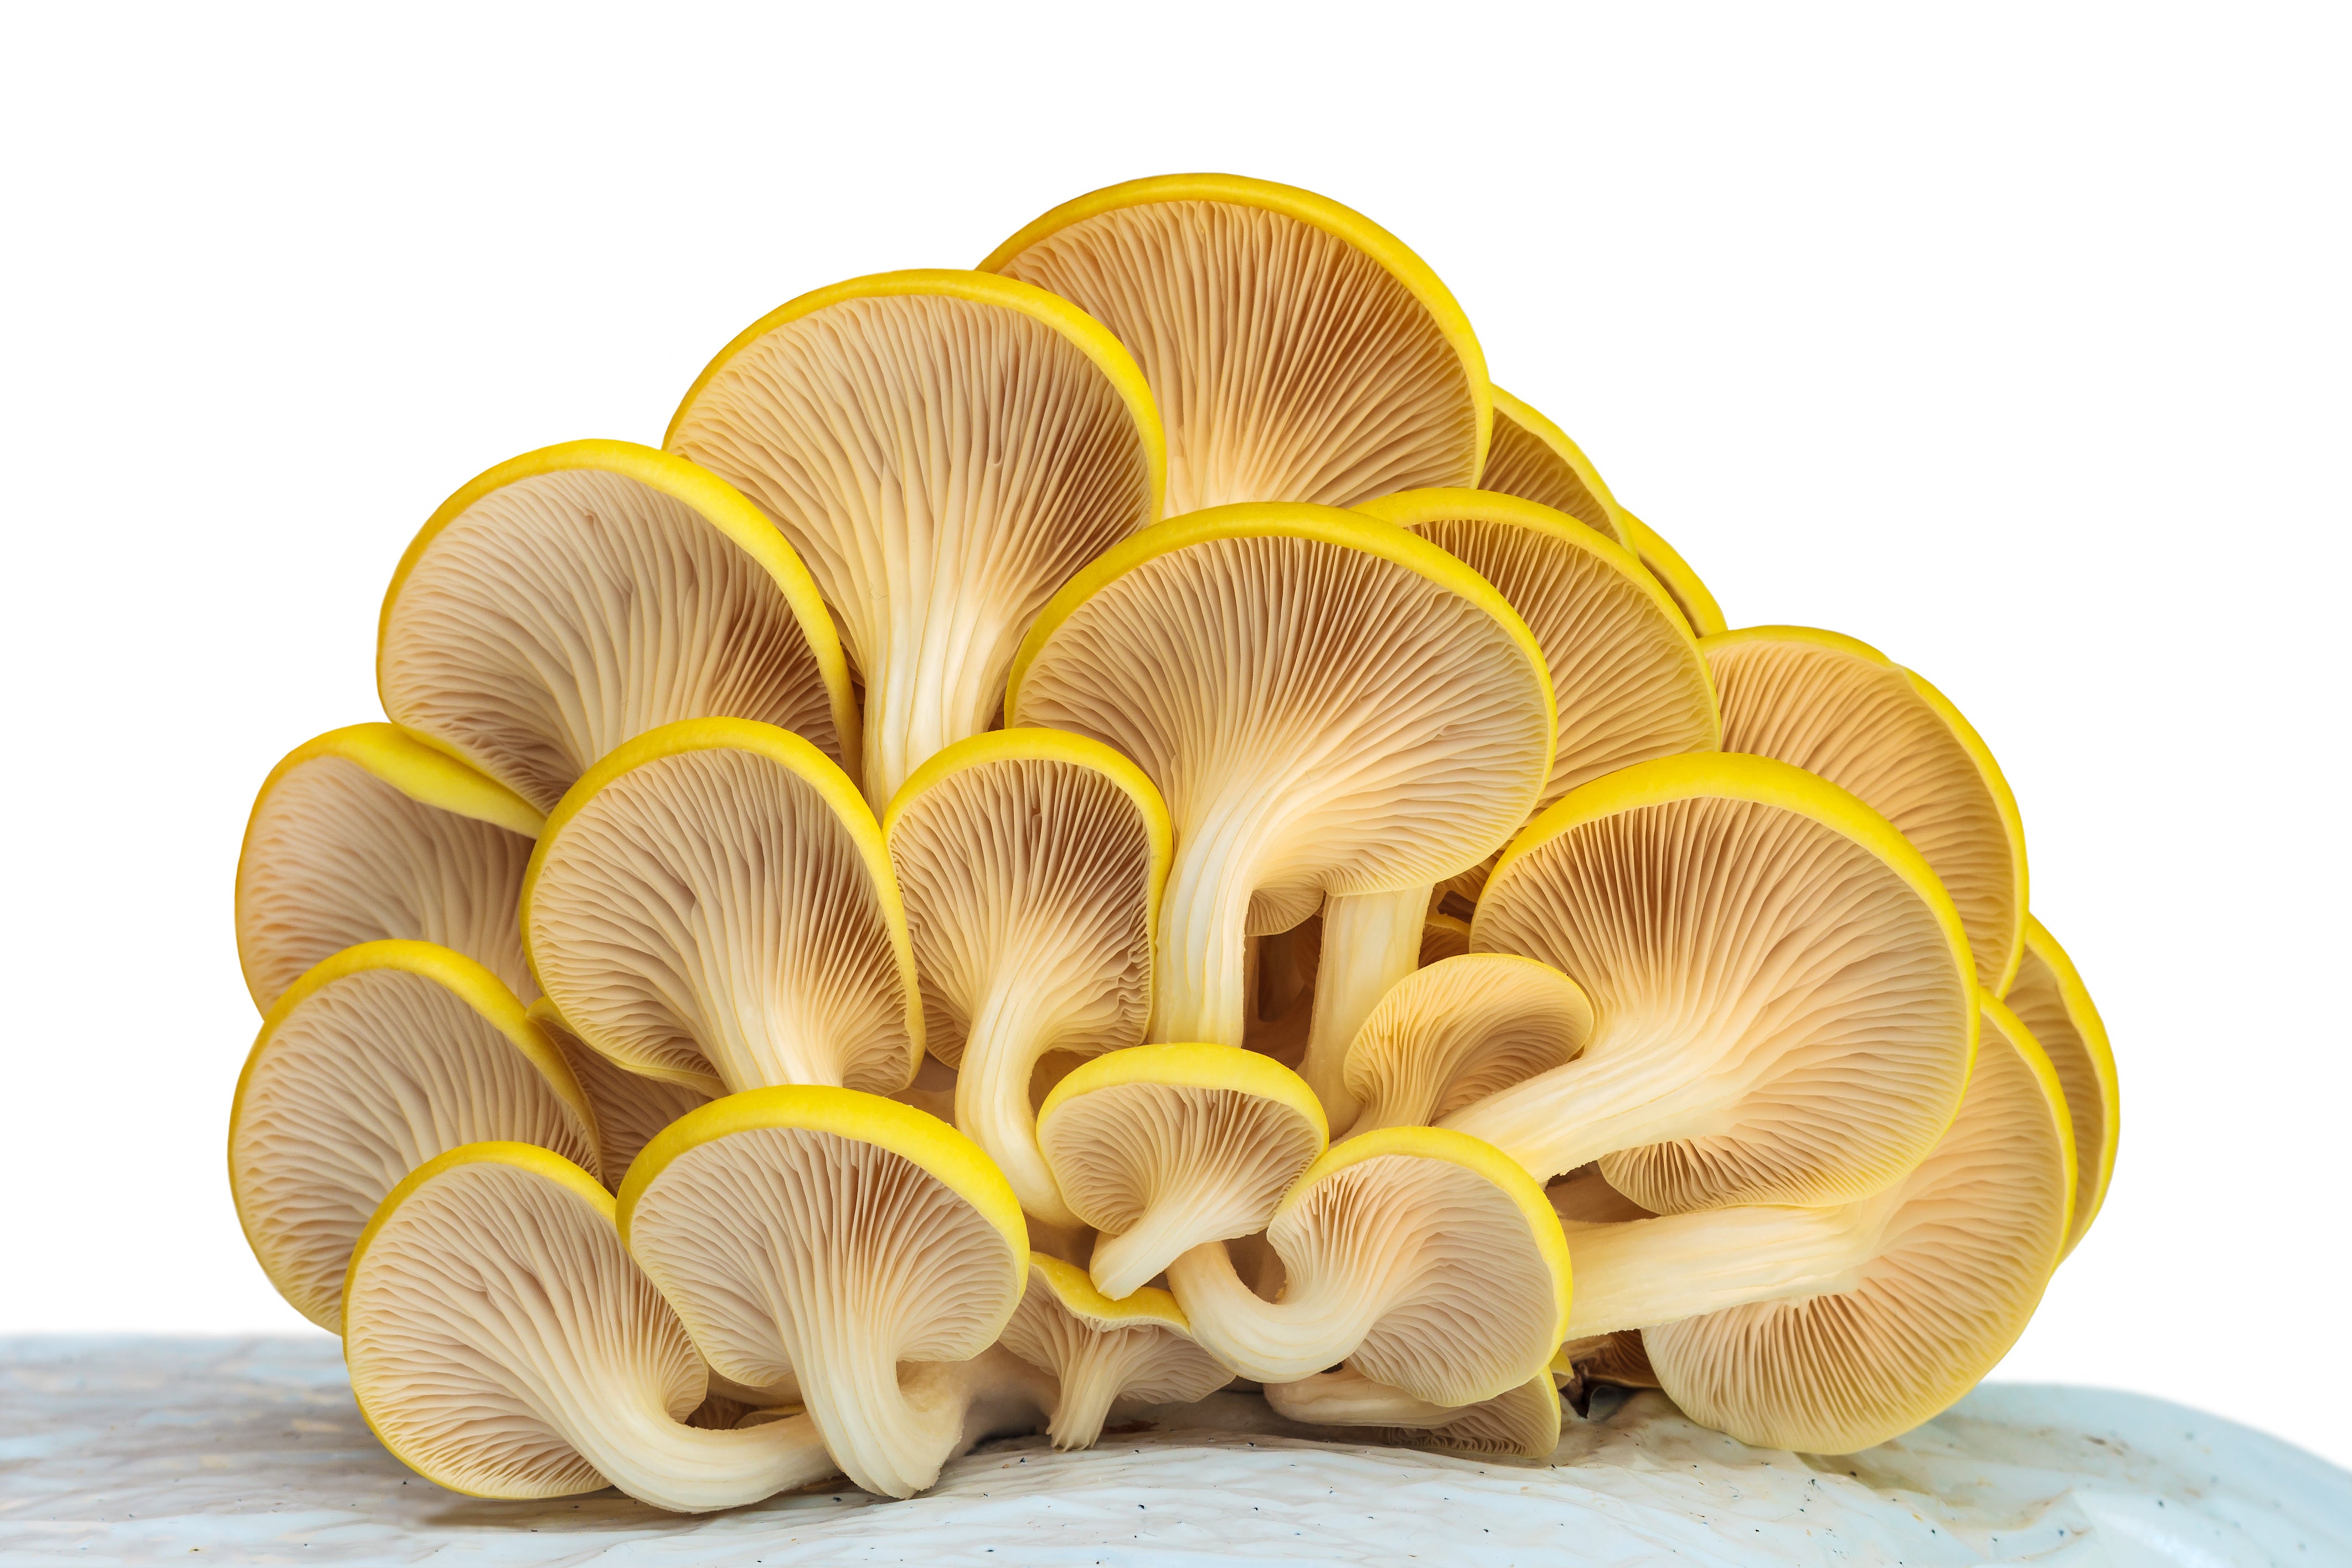 Grow Your Own Mushrooms - Golden Oyster